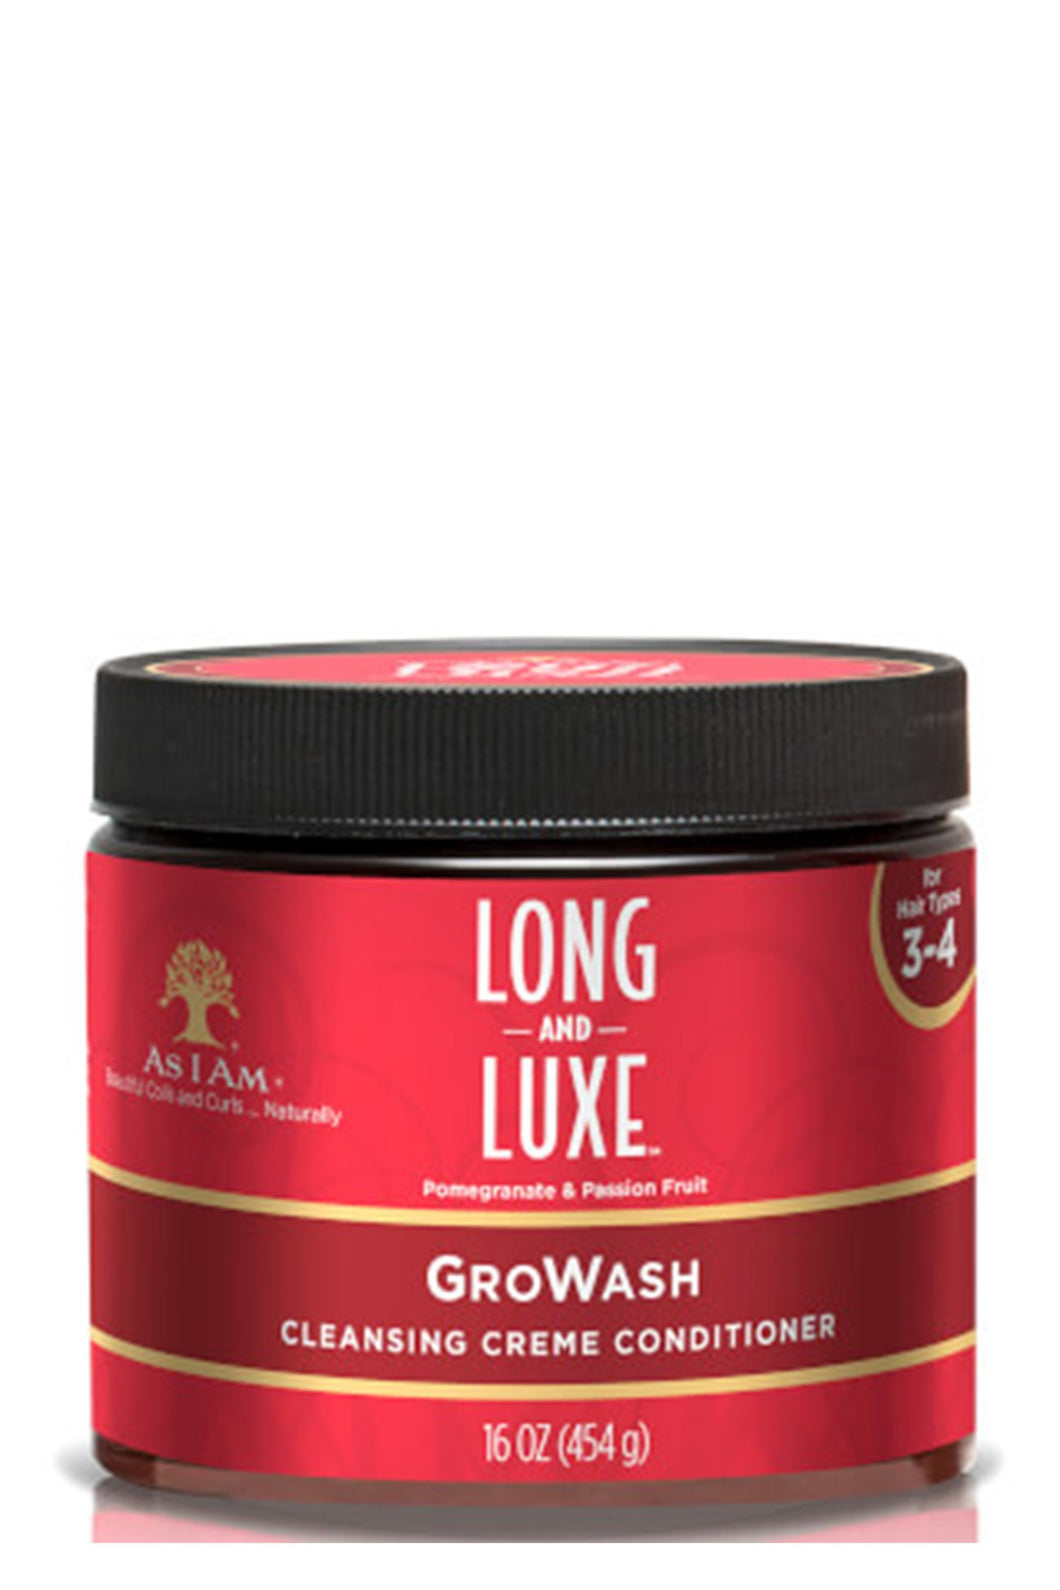 AS I AM Long and Luxe Gro Wash Conditioner Product